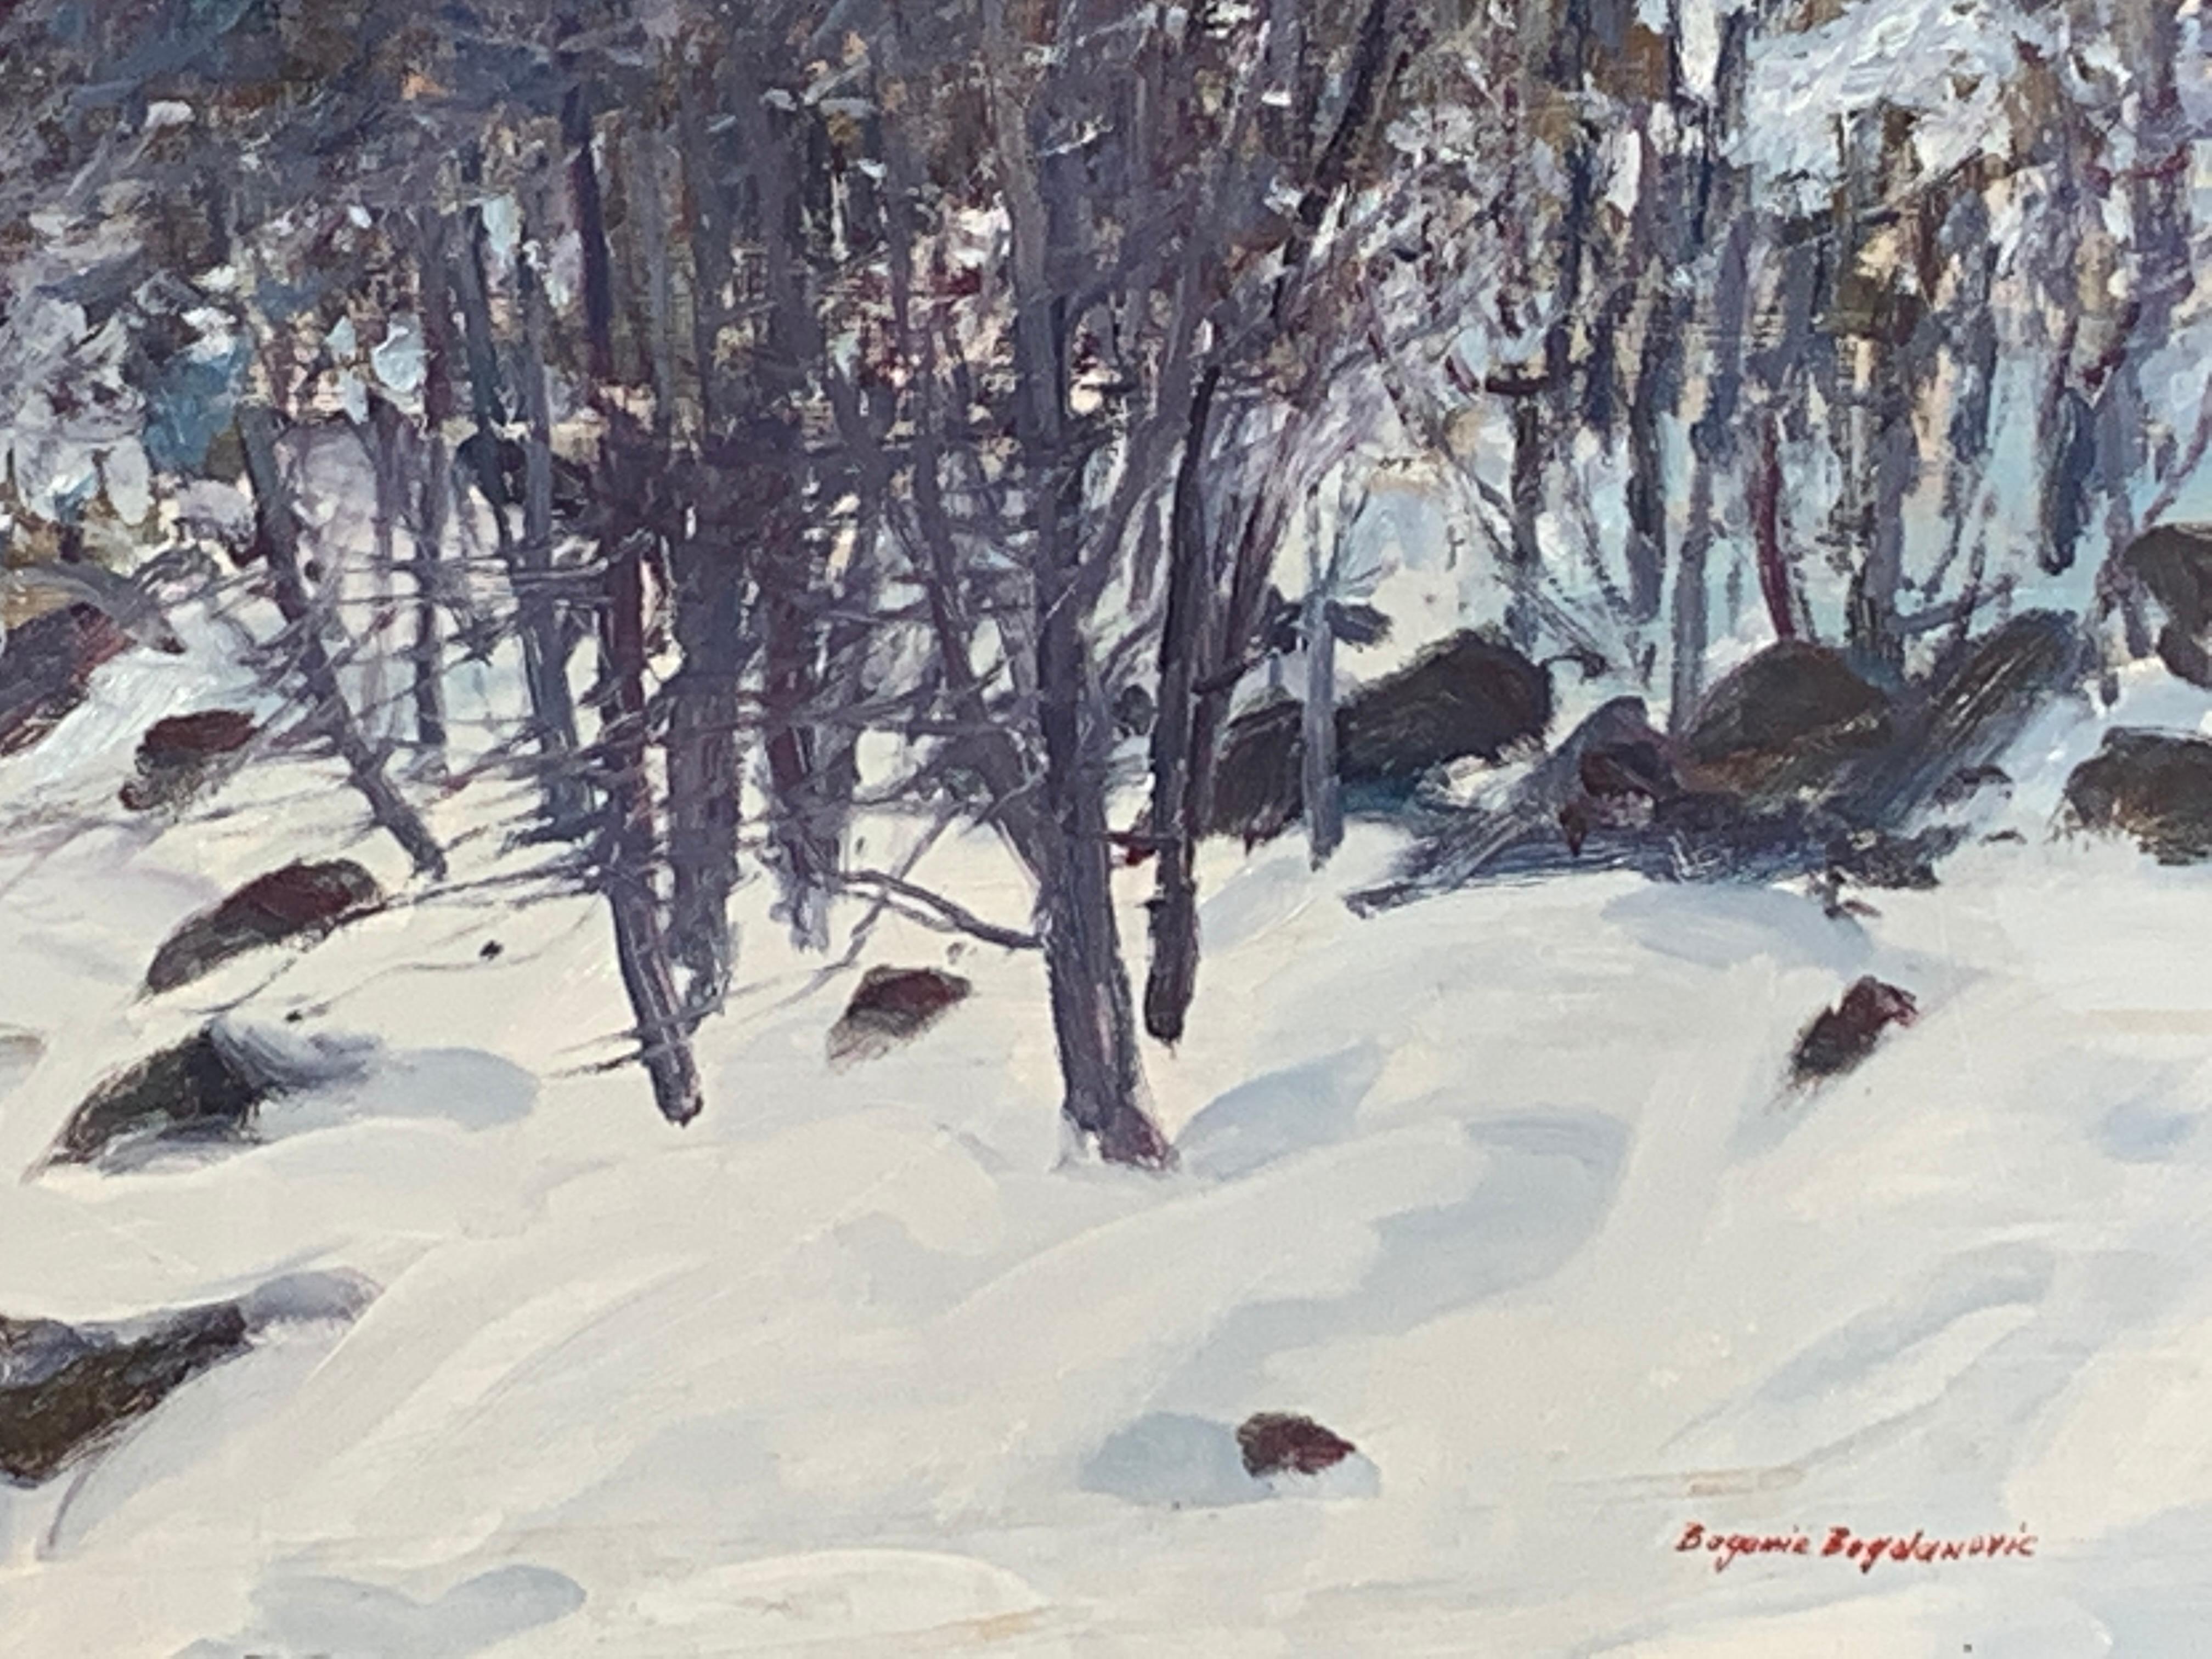 This original oil painting from Bogomir Bogdanovic is a perfect representation of his paintings that he is most known for of Central Park New York in the snow. In this original oil painting you can see people with their families walking around in